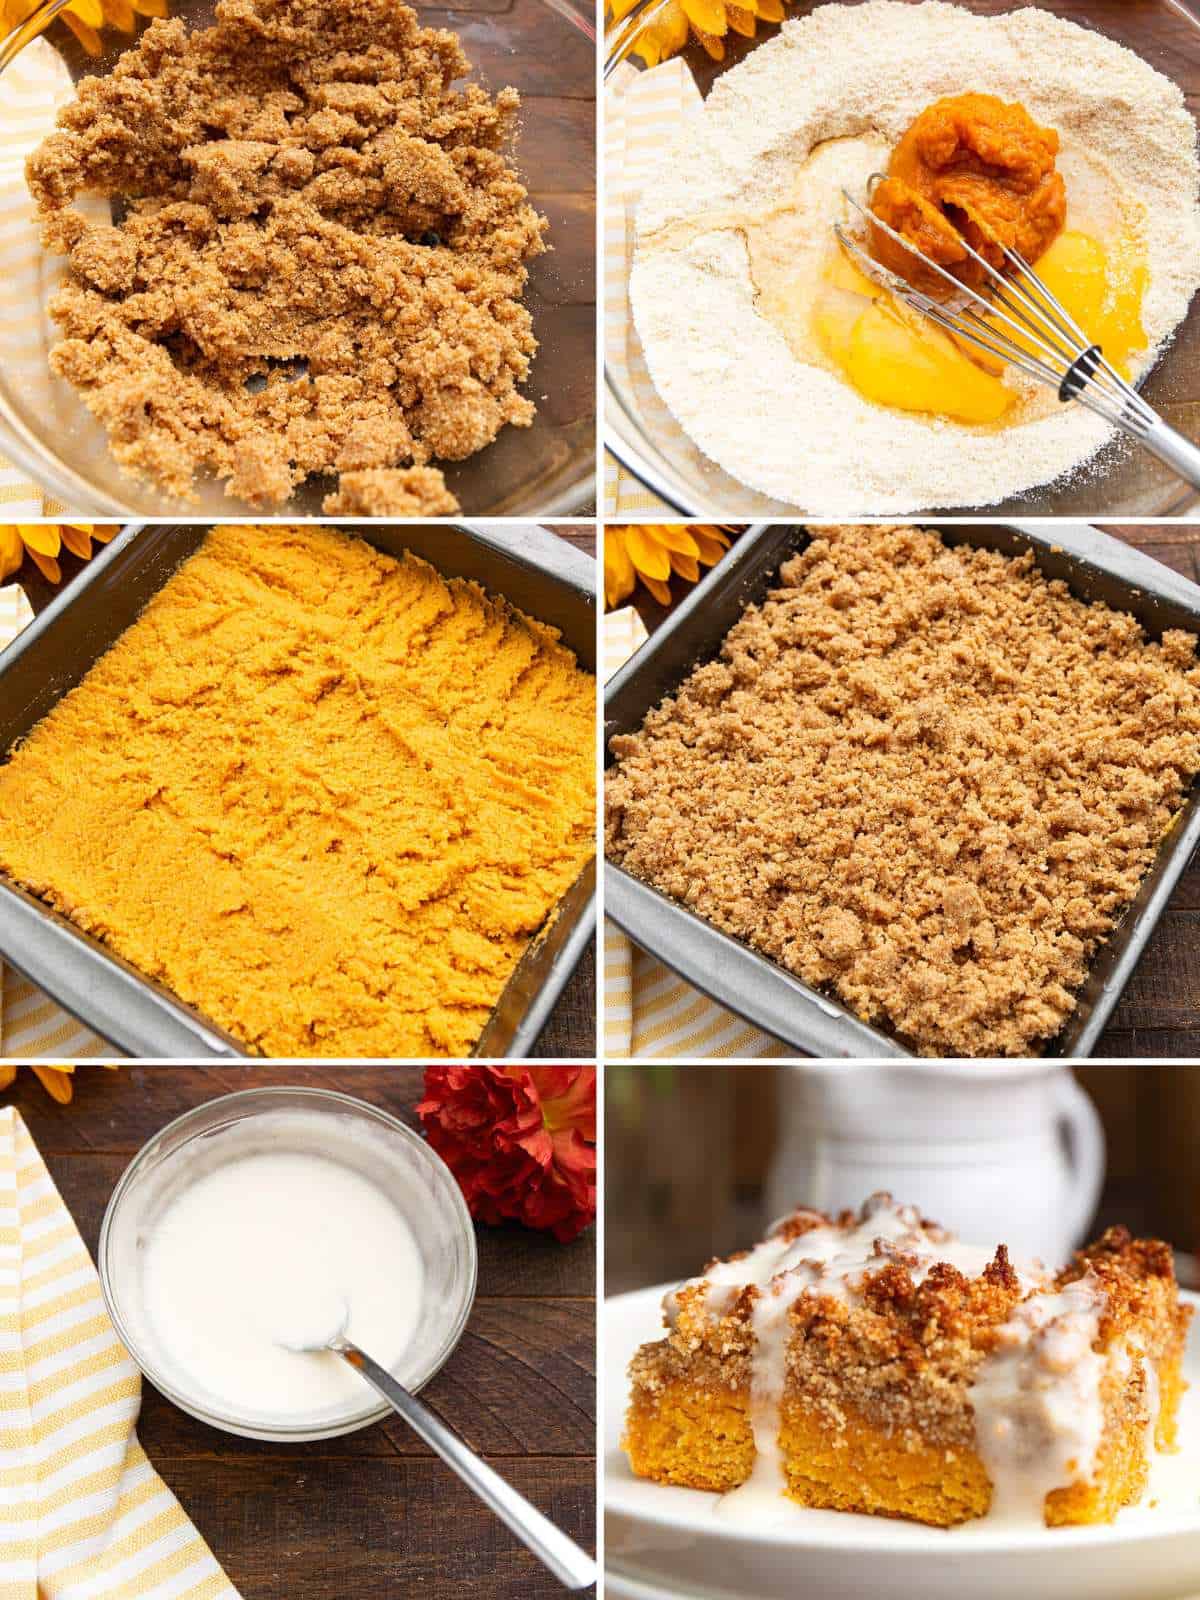 A collage of 6 images showing how to make Keto Pumpkin Crumb Cake.